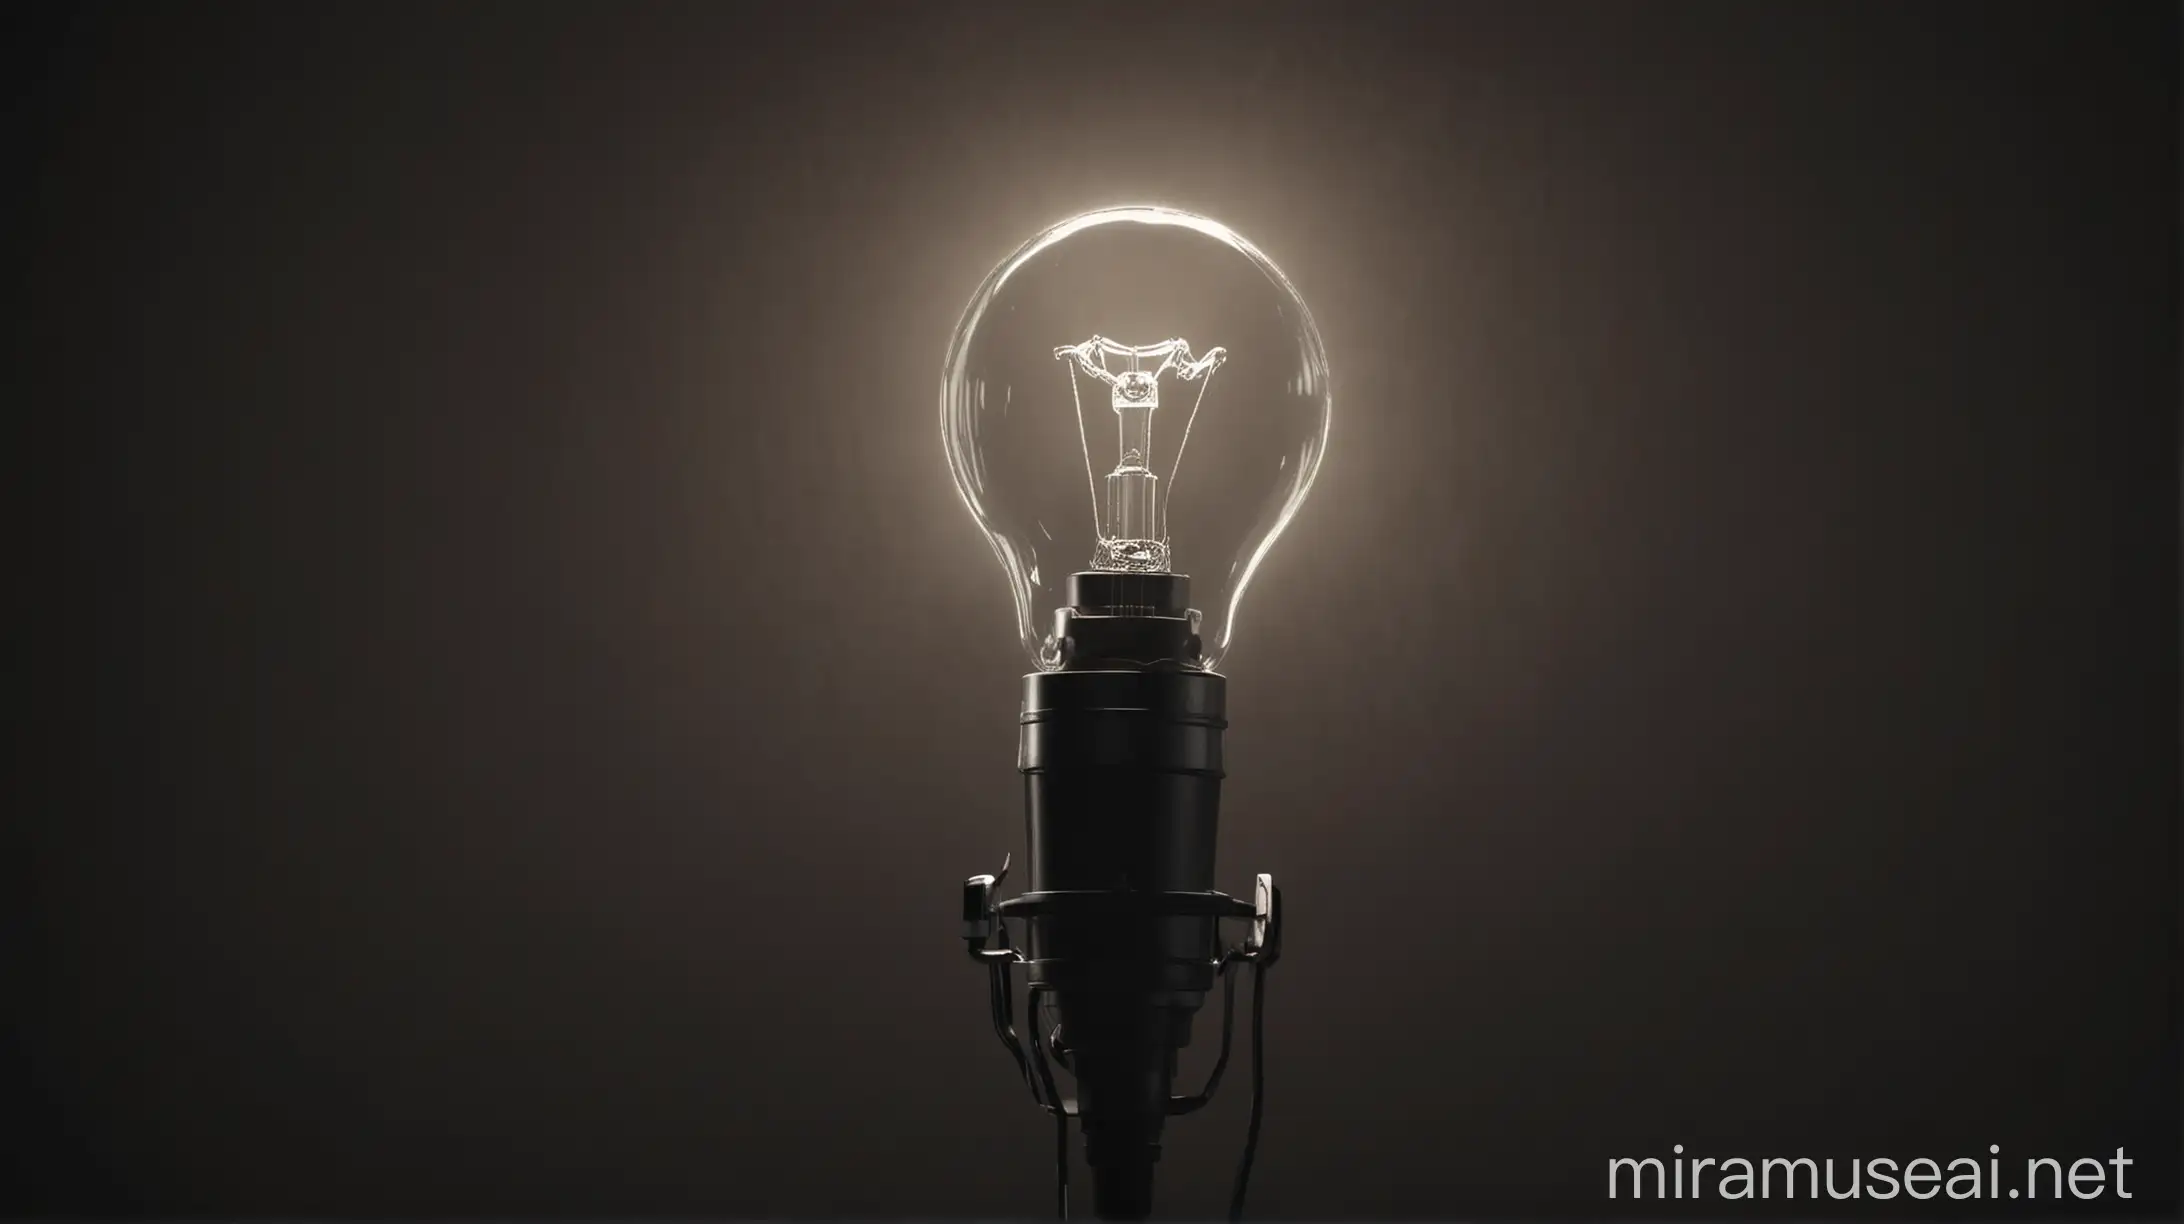 Gloomy Style Music Visualization with Centralized Microphone and Illuminated Light Bulb